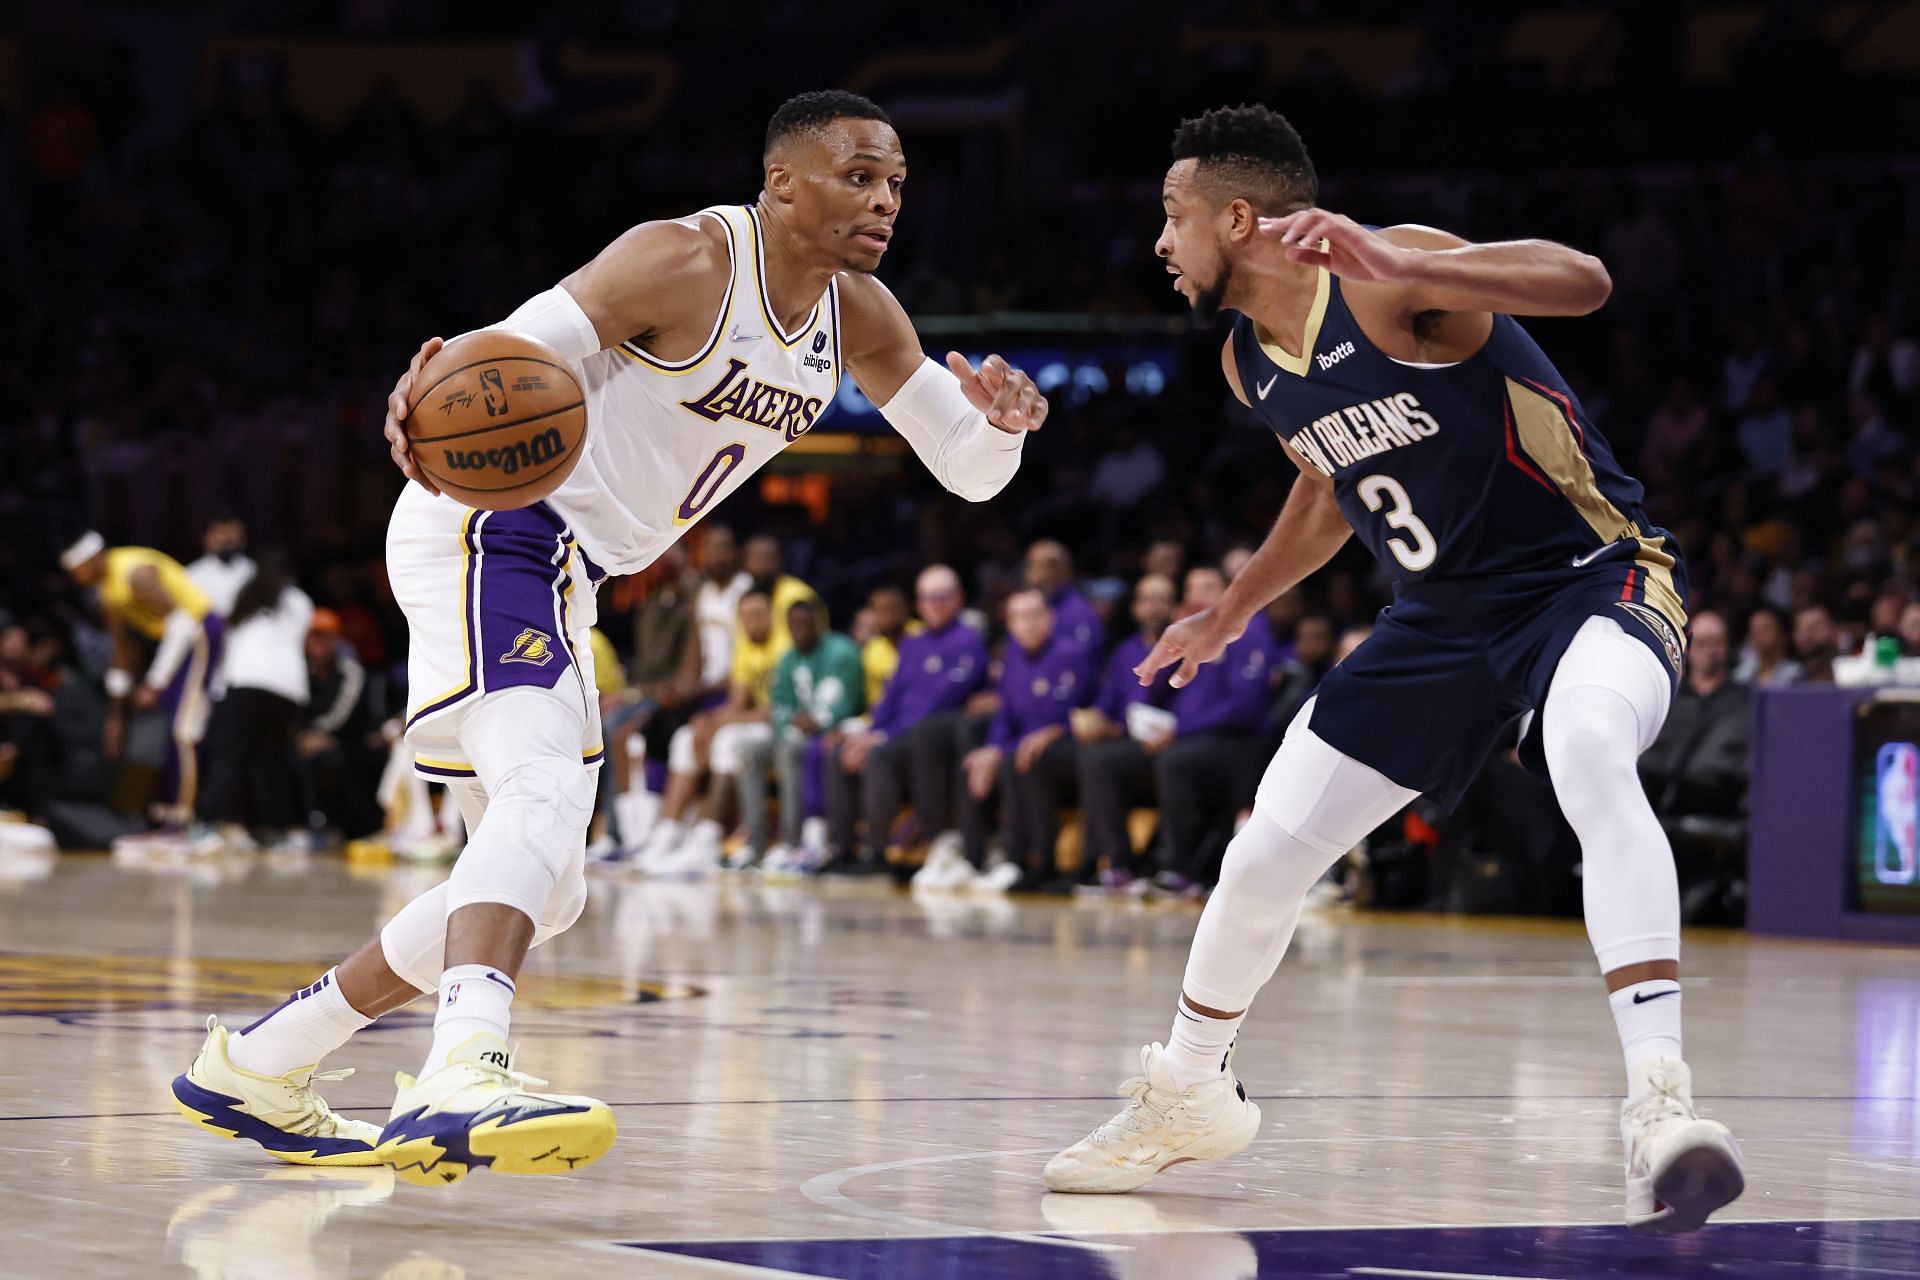 The LA Lakers will host the New Orleans Pelicans on April 1st